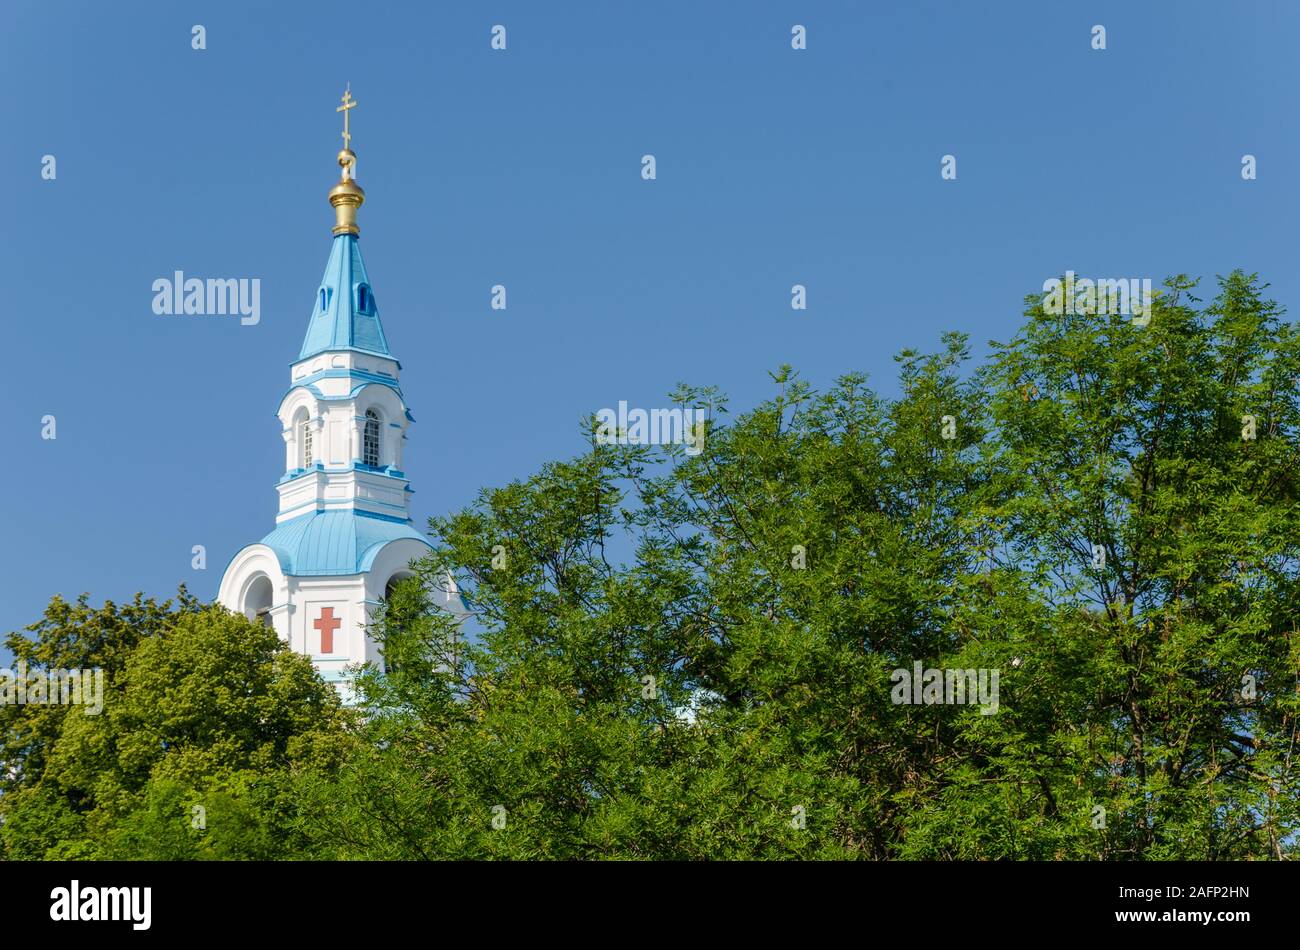 Spaso-Preobrazhensky Cathedral of the Valaam Monastery.The bell tower of the Orthodox Cathedral. Valaam Island, Karelia, Russia. Stock Photo